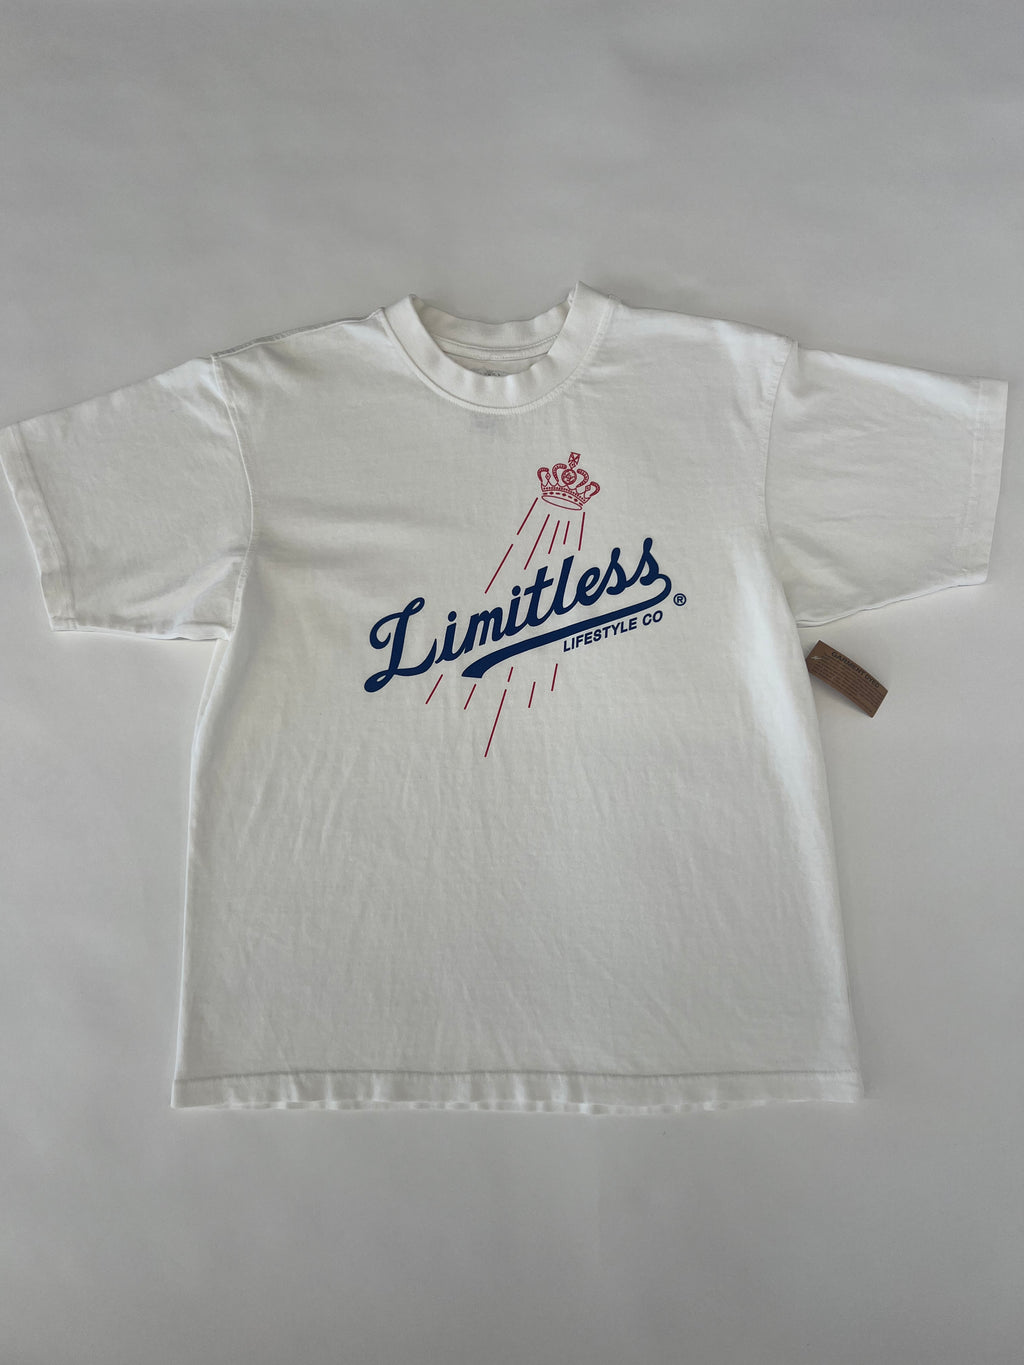 Limitless "The Town" T-shirt (White)